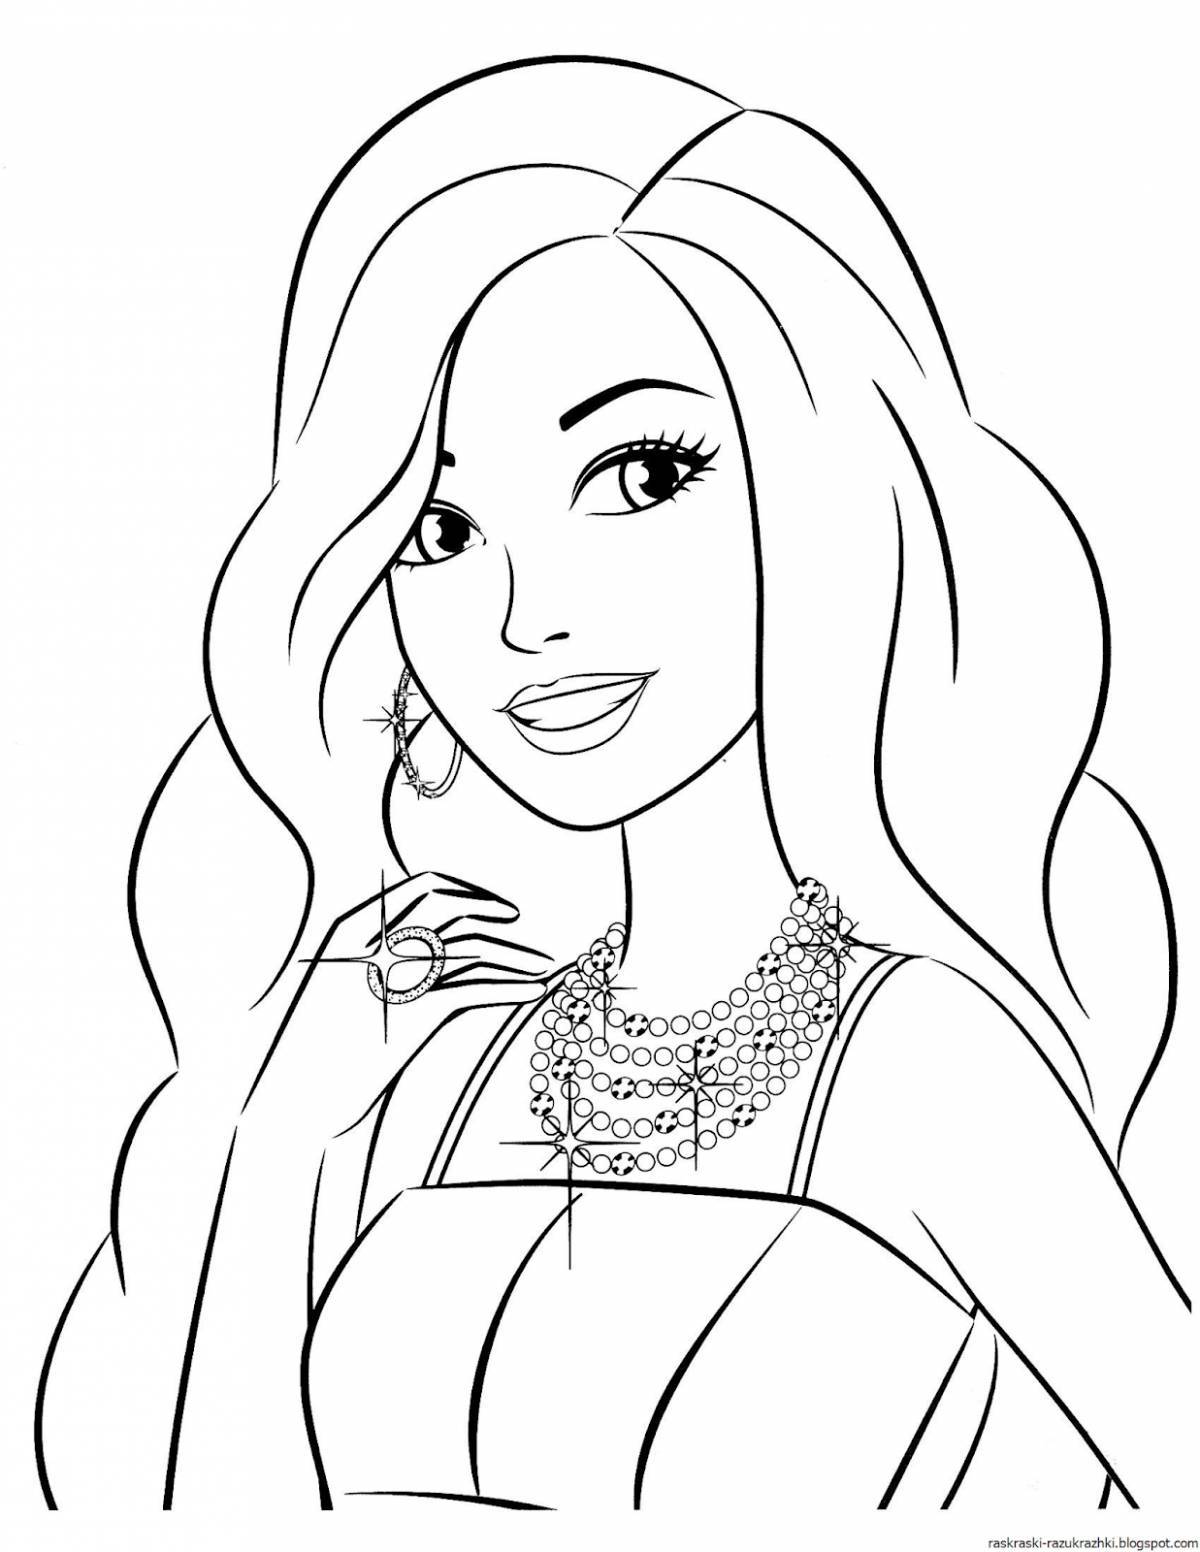 Refreshing coloring pages for girls